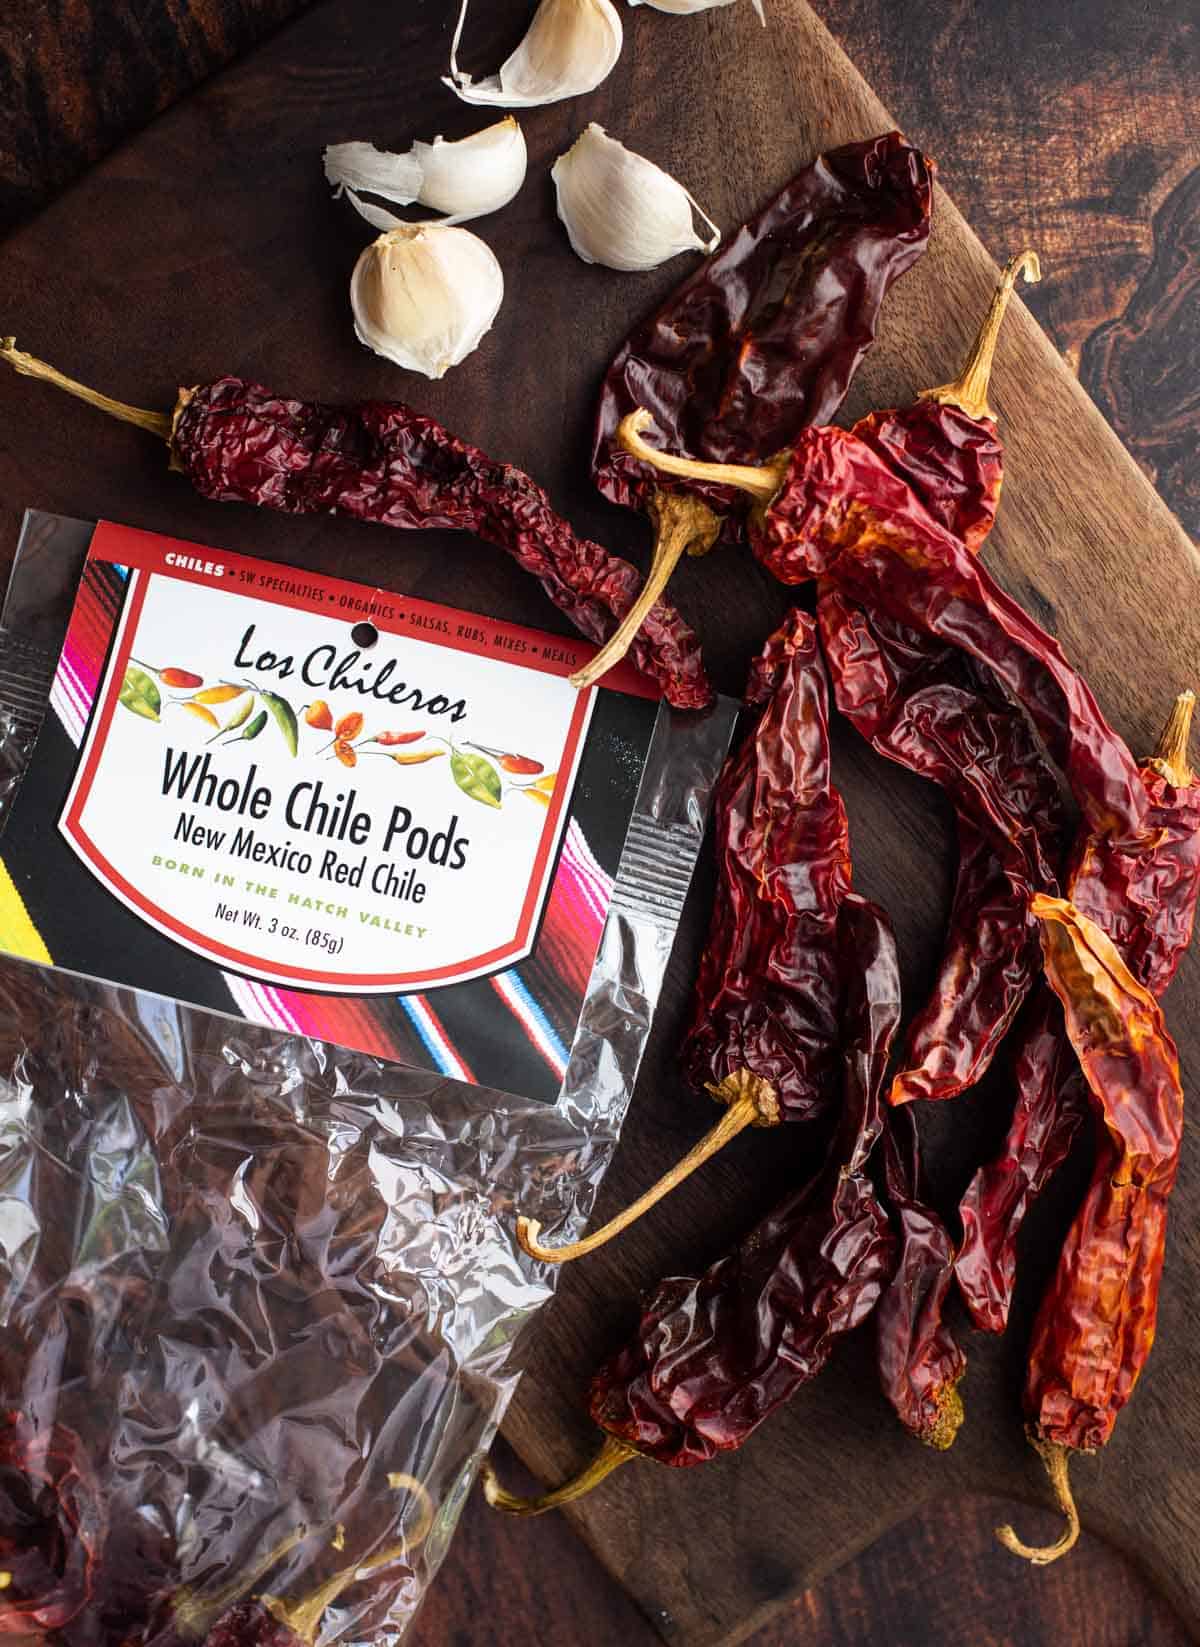 Dried New Mexic0 chiles in a 3-ounce bag.